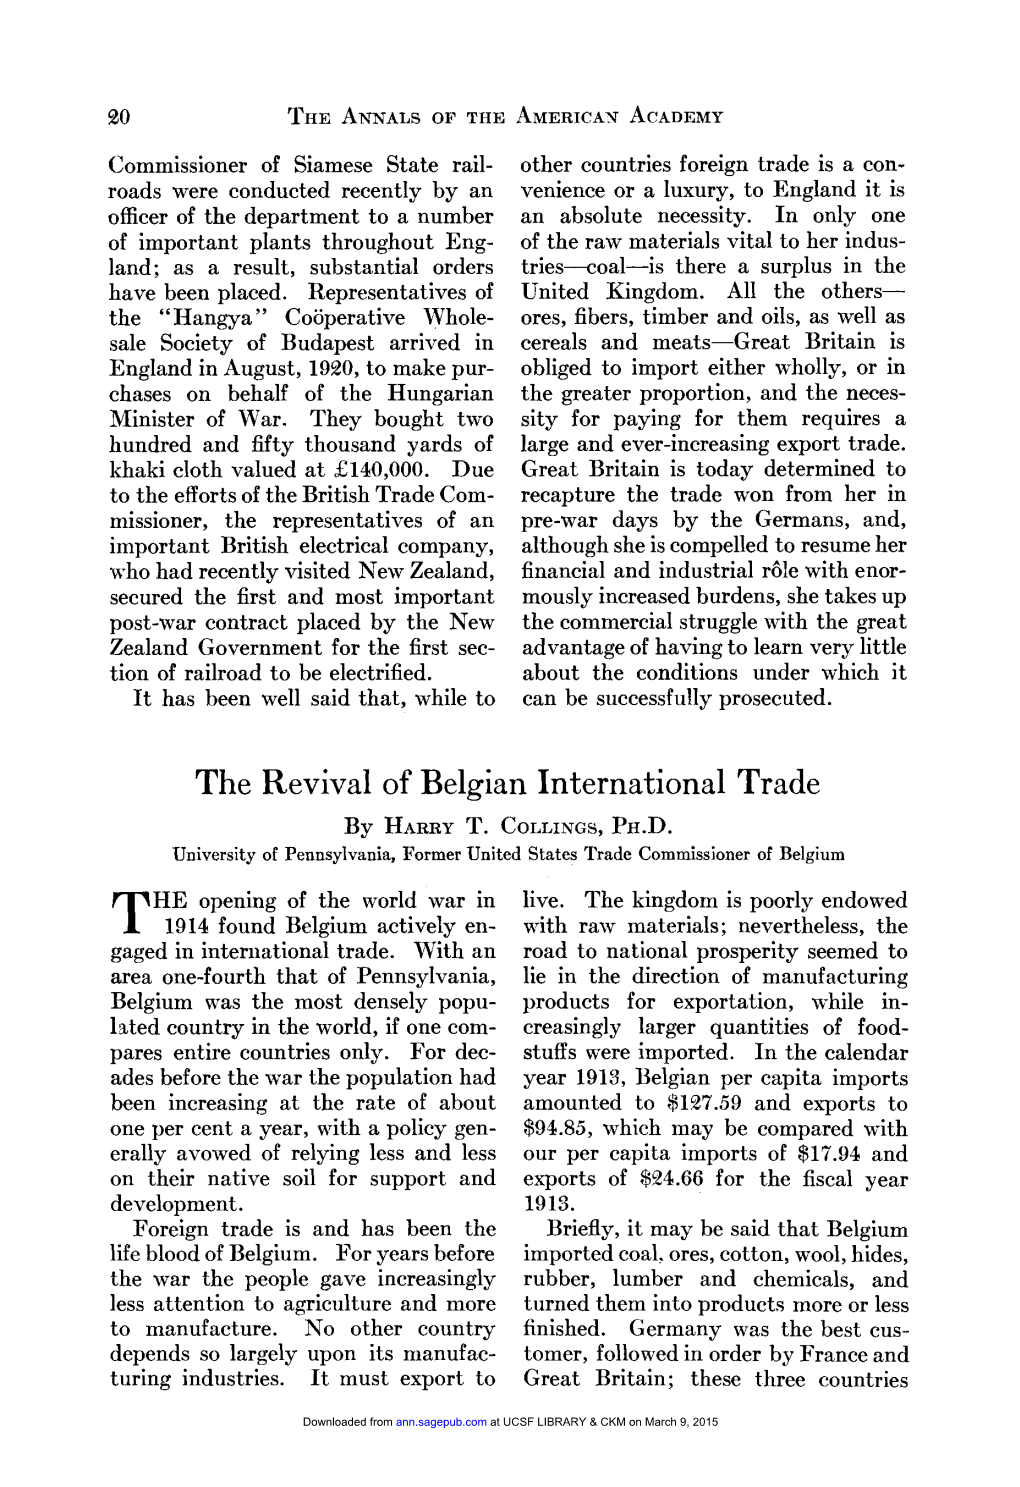 The Revival of Belgian International Trade by HARRY T